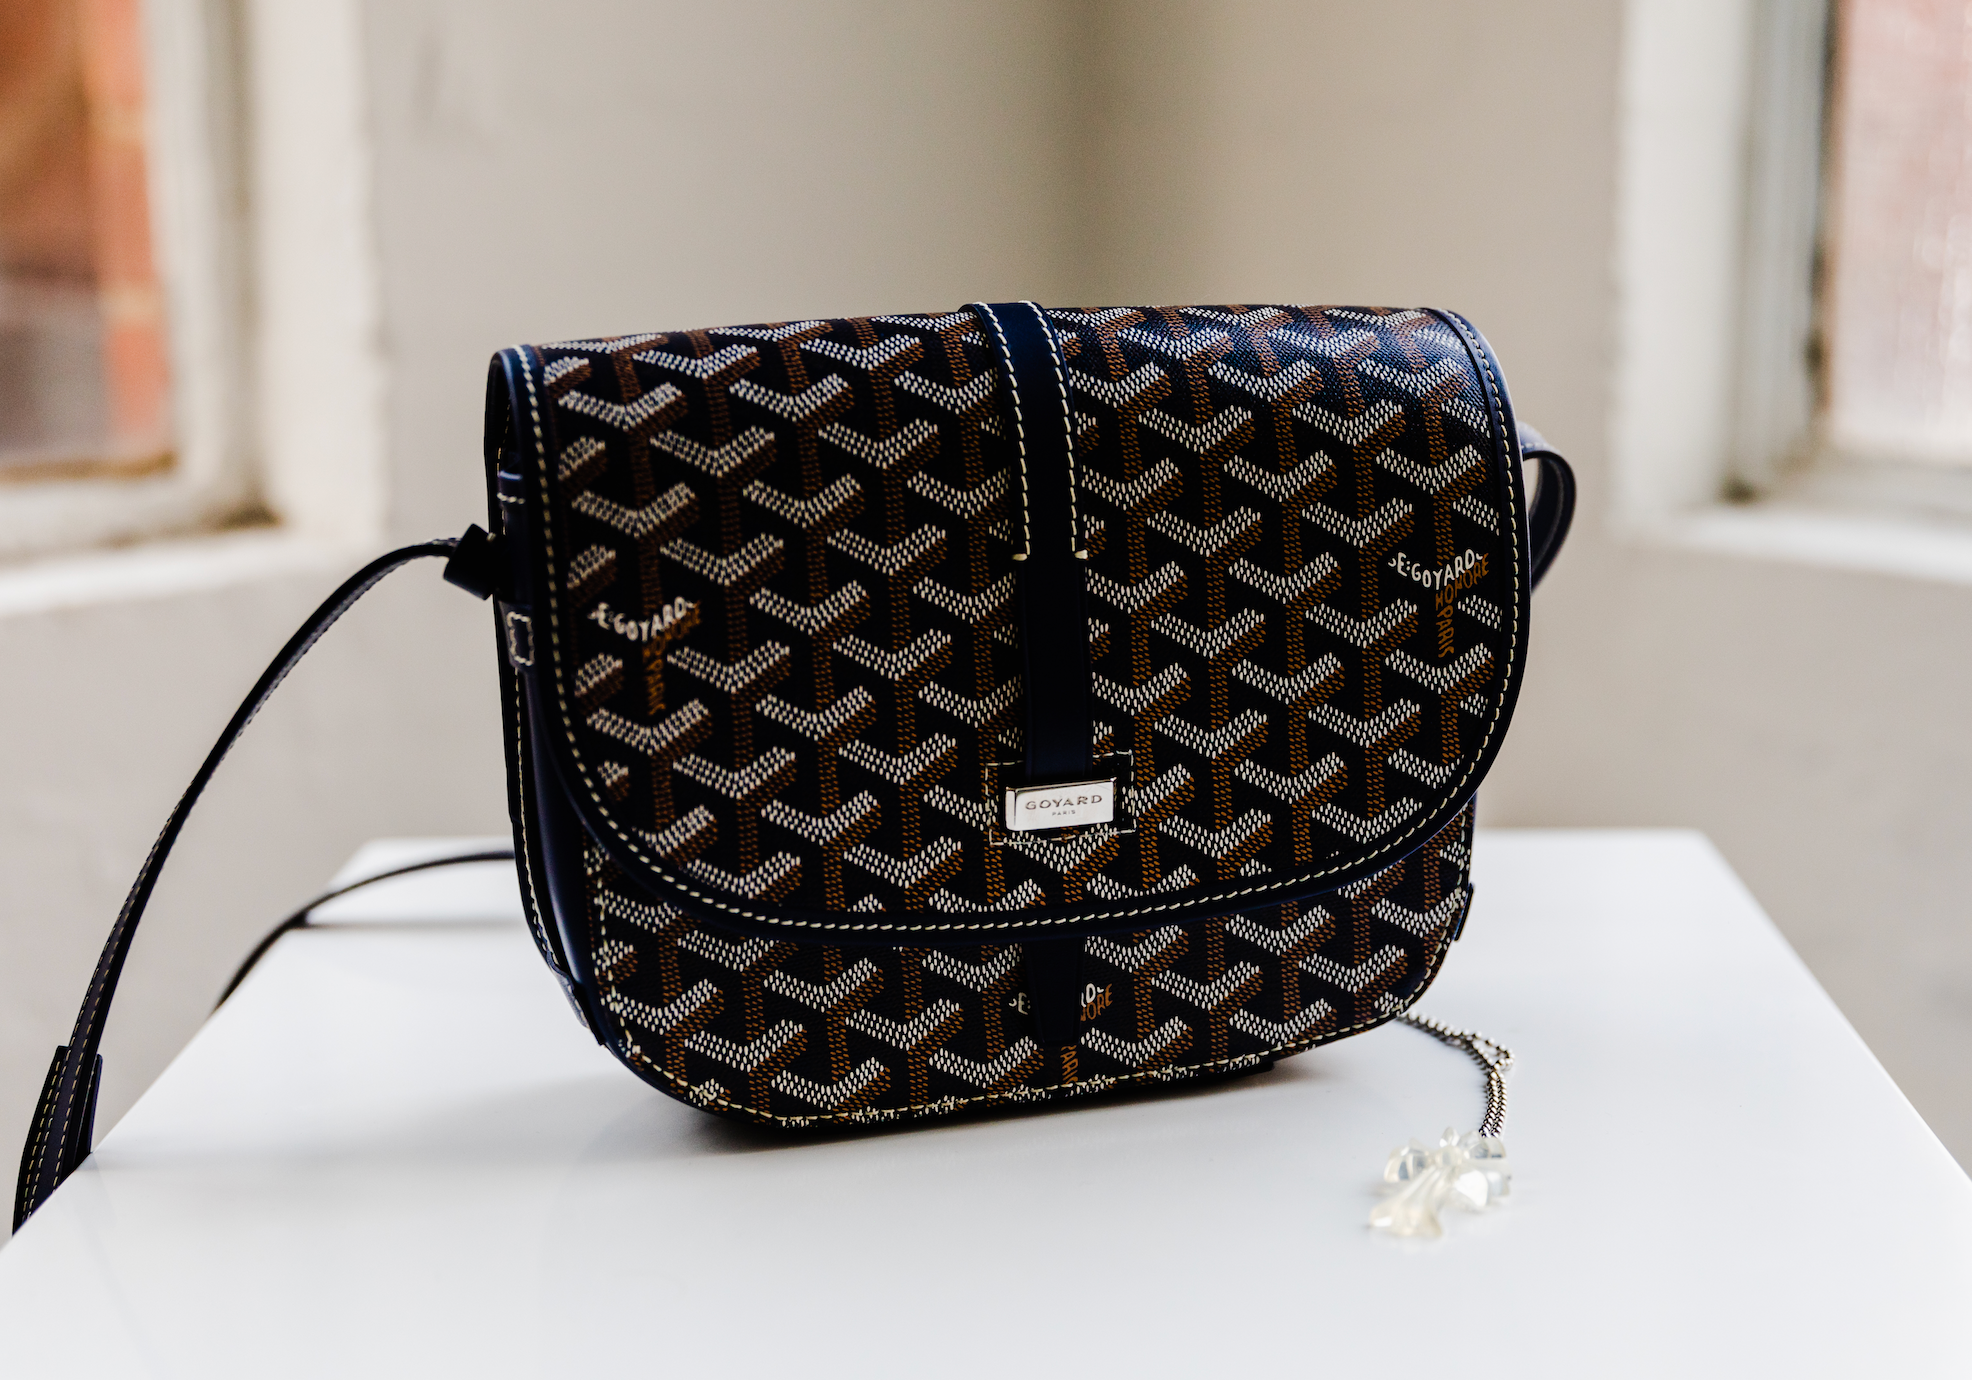 Goyard Navy Blue Chevron Print Coated Canvas Belvedere II PM Crossbody –  Curated by Charbel